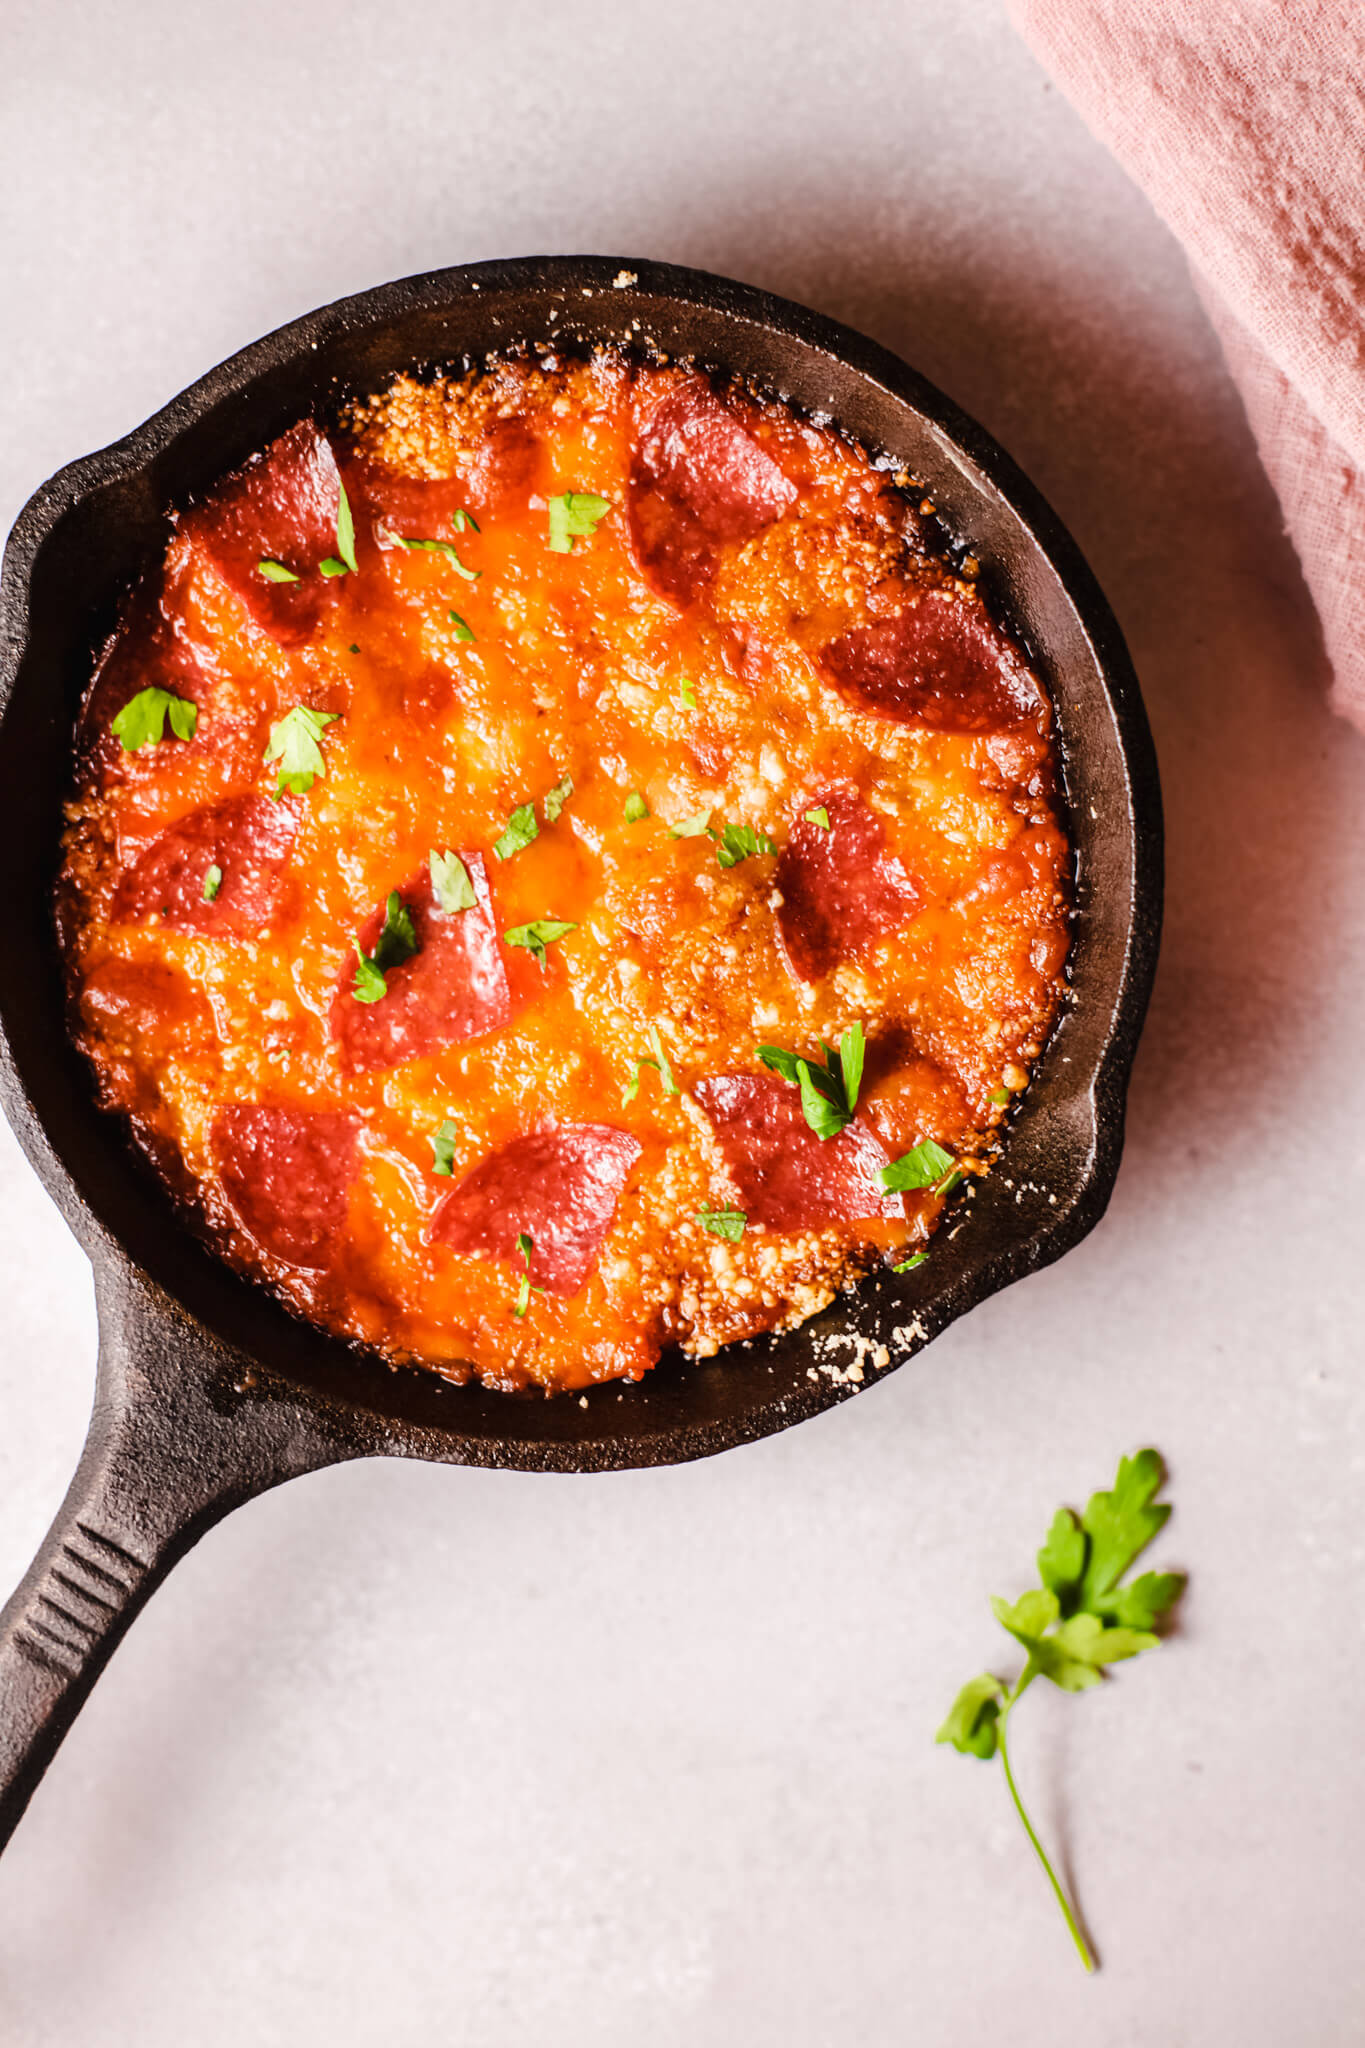 A skillet full of the pepperoni dip.